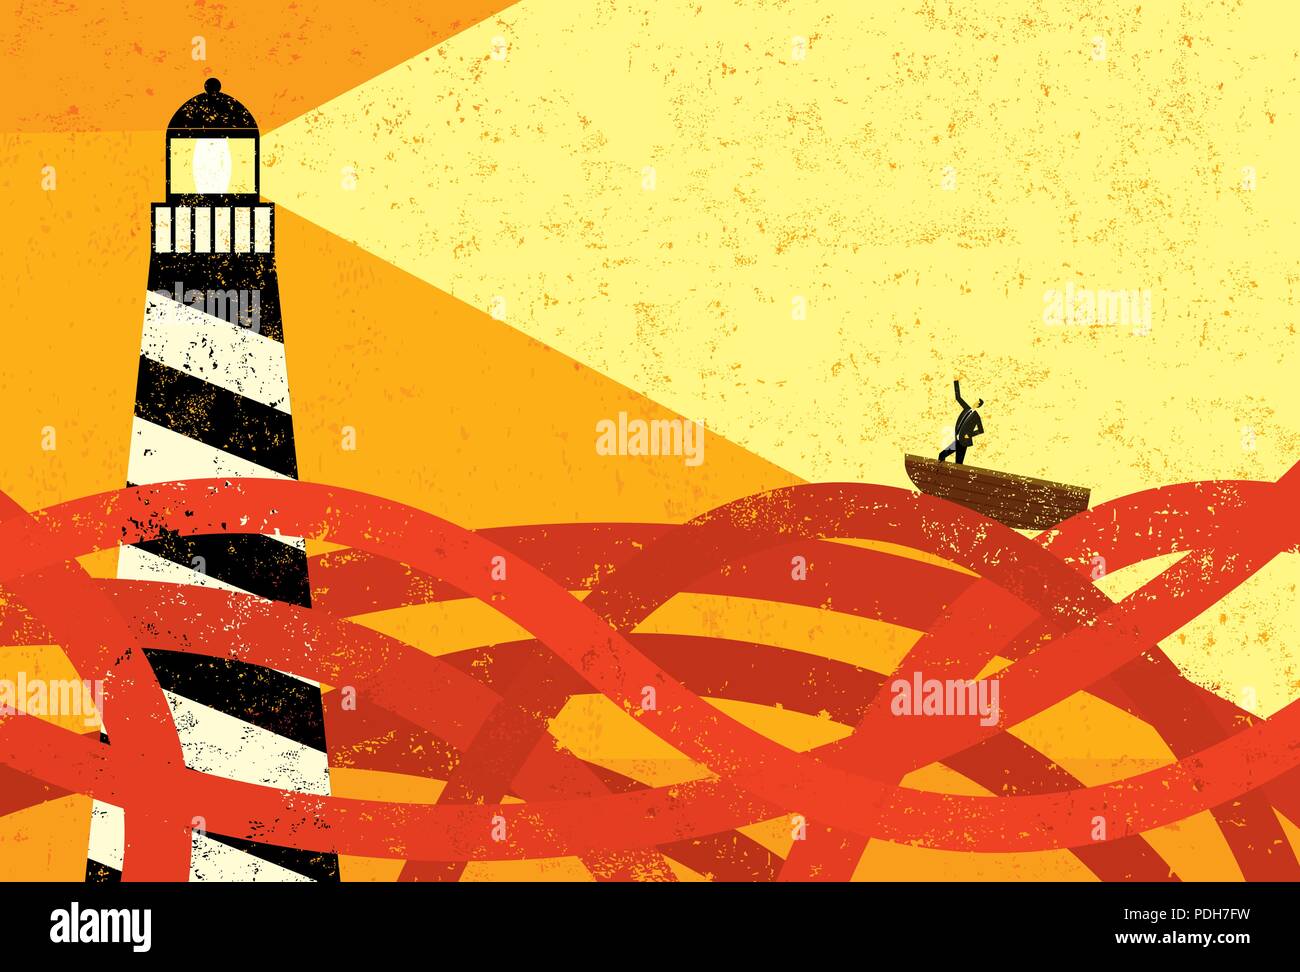 Guidance in a sea of red tape. A lighthouse providing guidance to a boat in a sea of red tape. Stock Vector